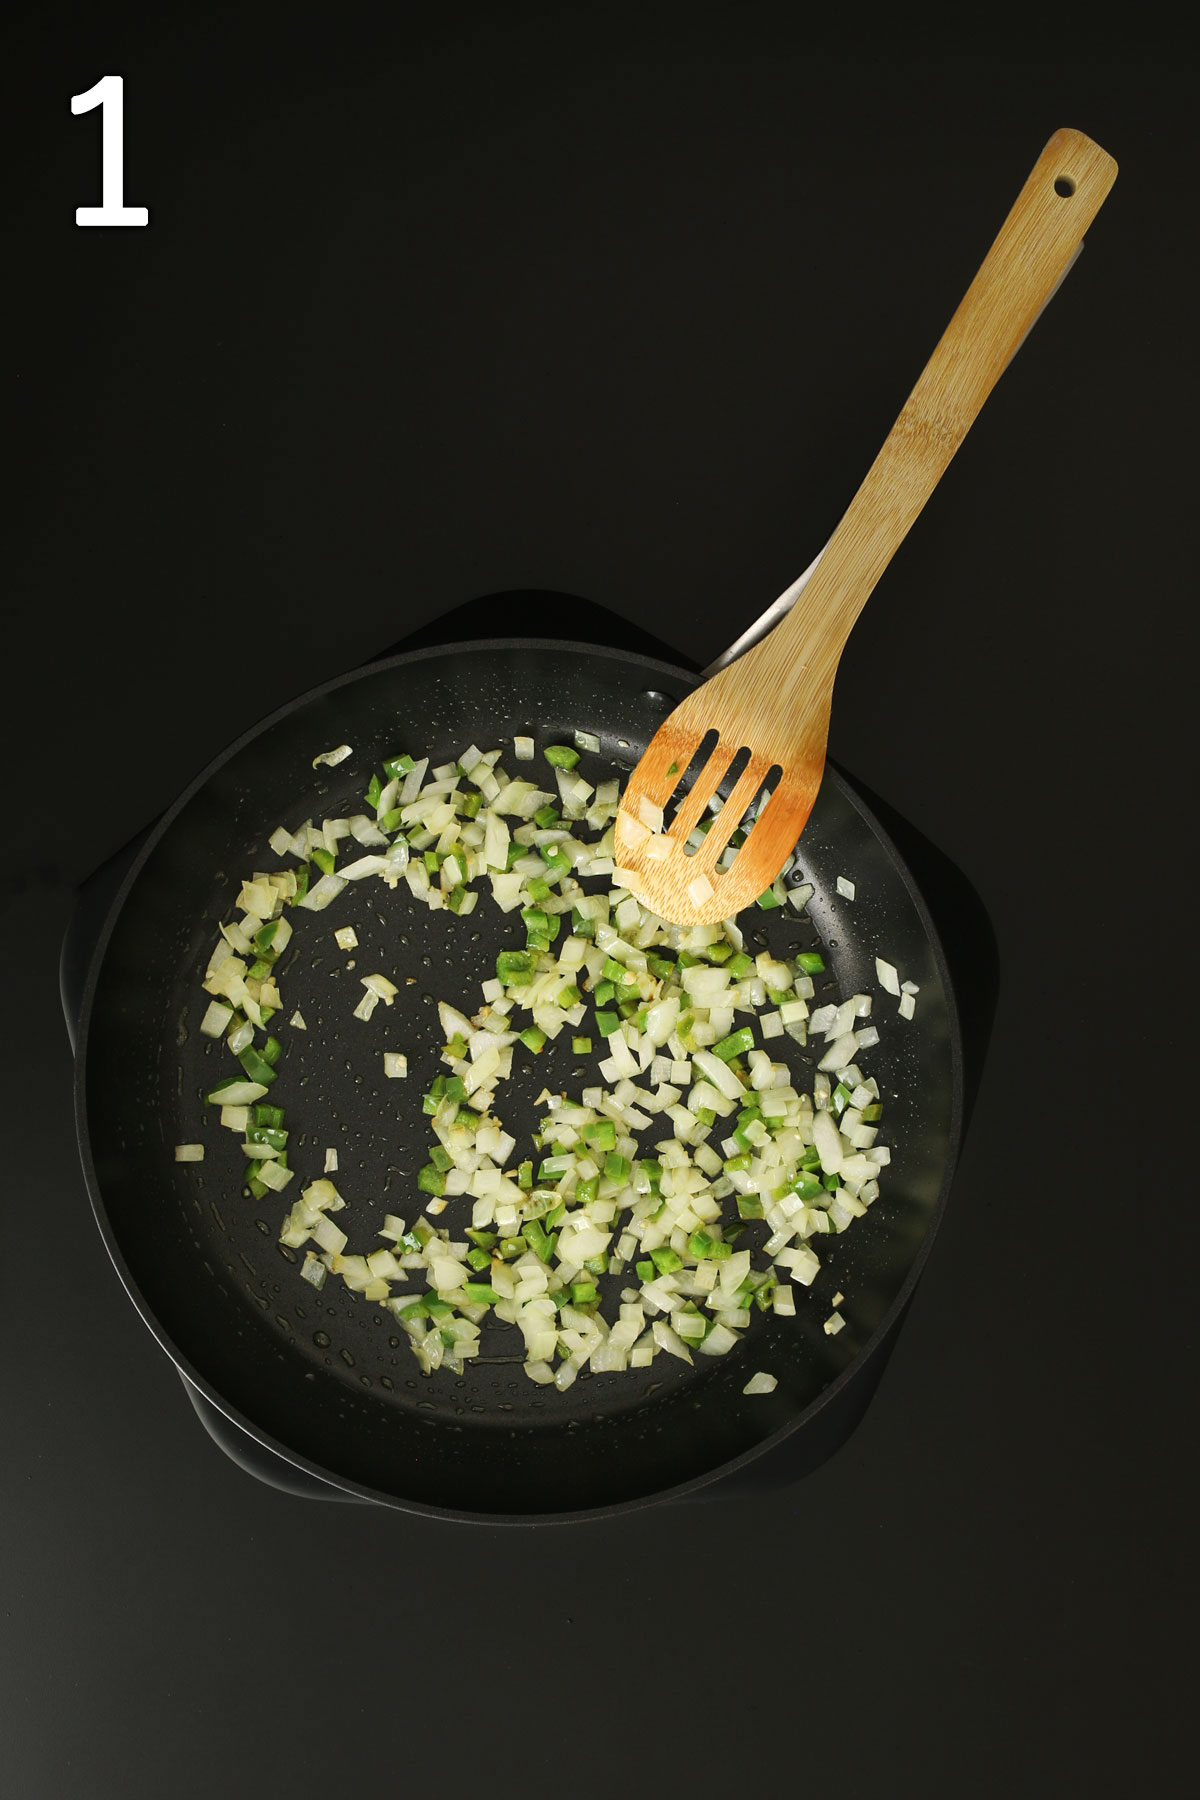 sauteing onions, garlic, and jalapeno in large skillet with wooden spoon.